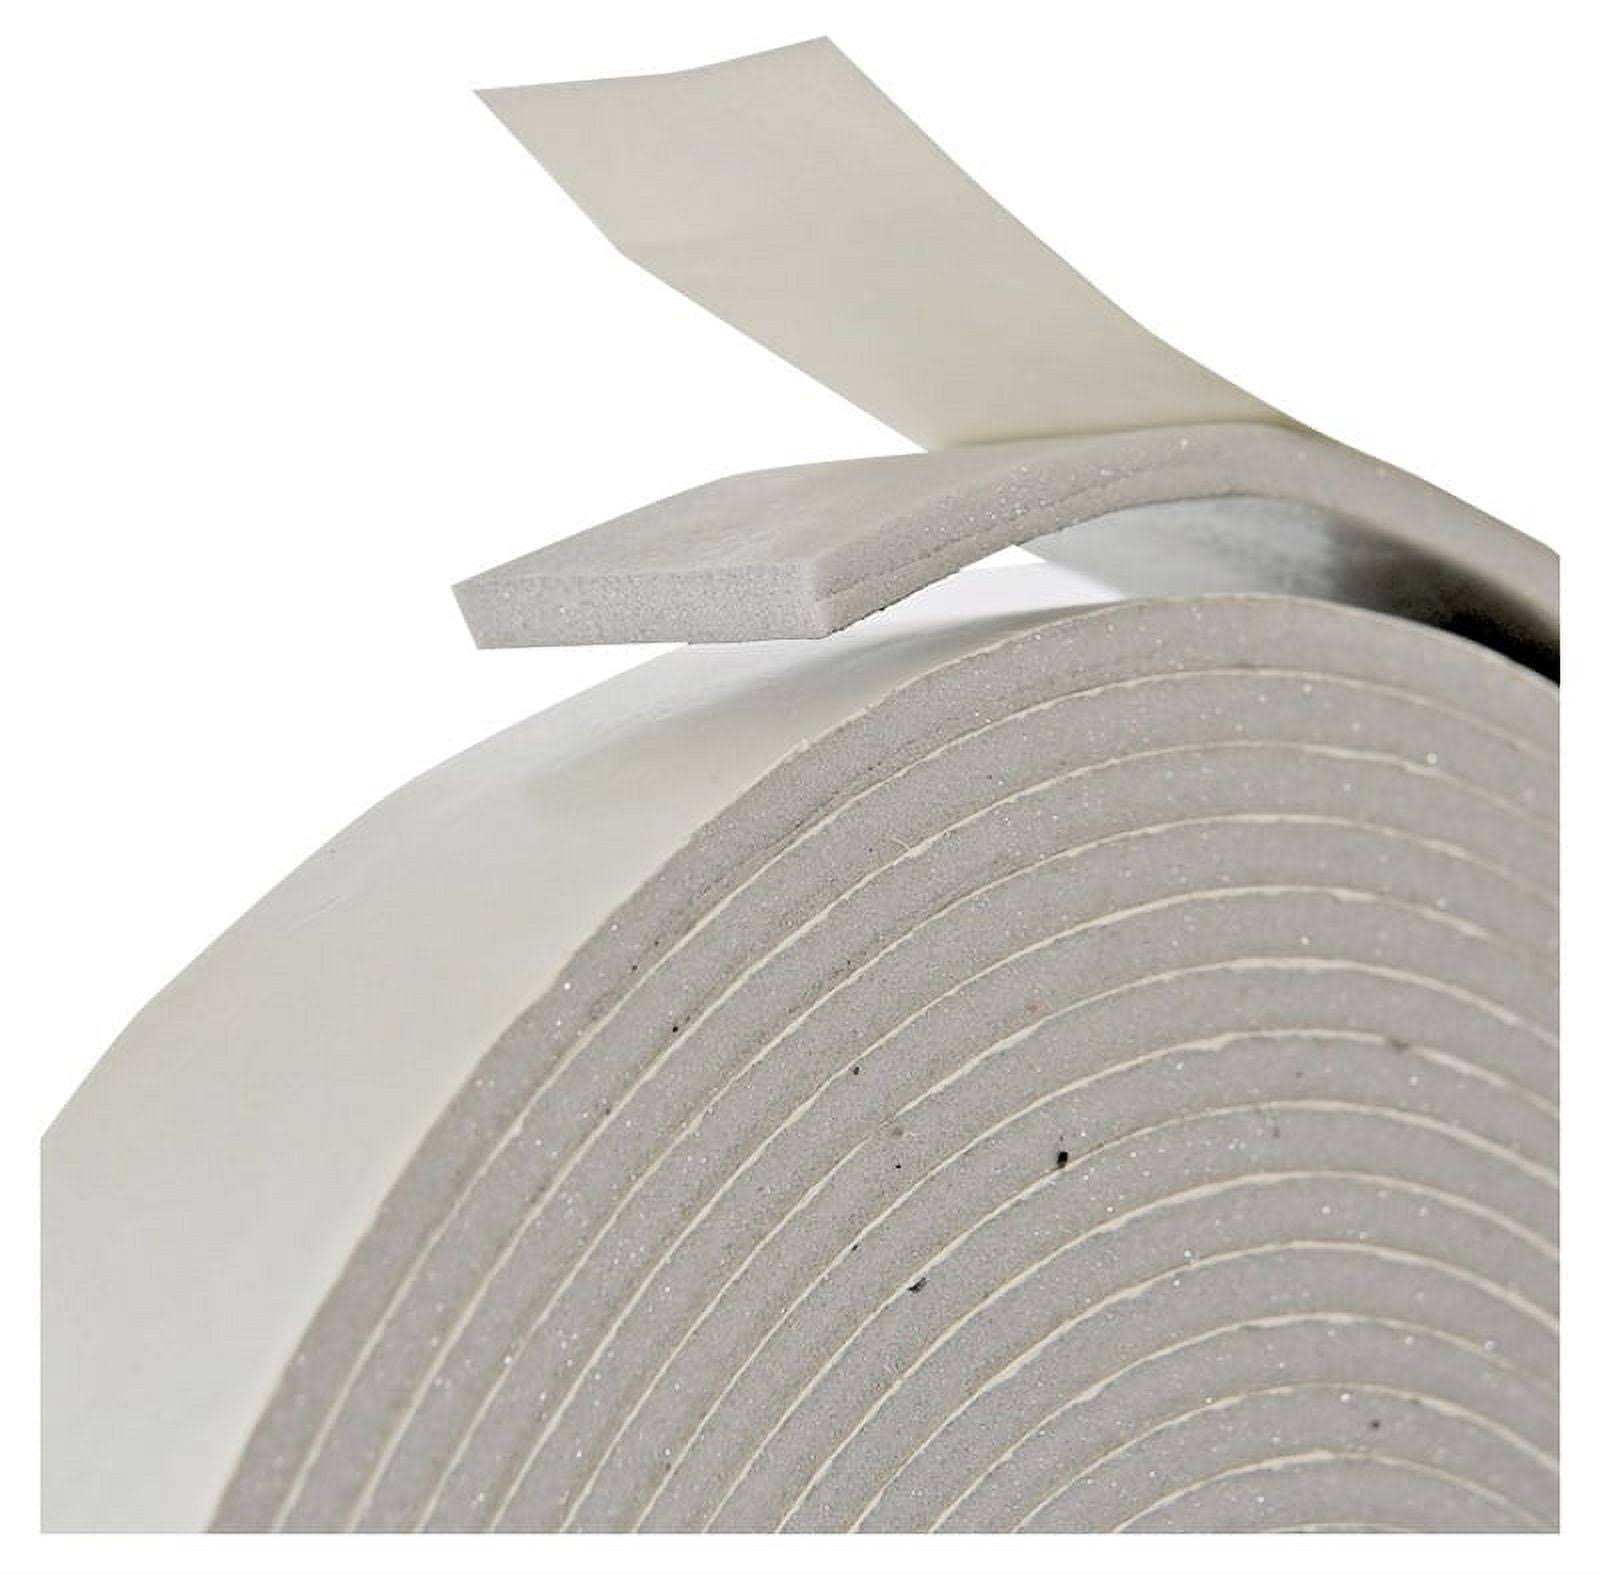 Frost King V447H Camper Mounting Tape - Grey, 1-1/4" x 3/16" x 30'